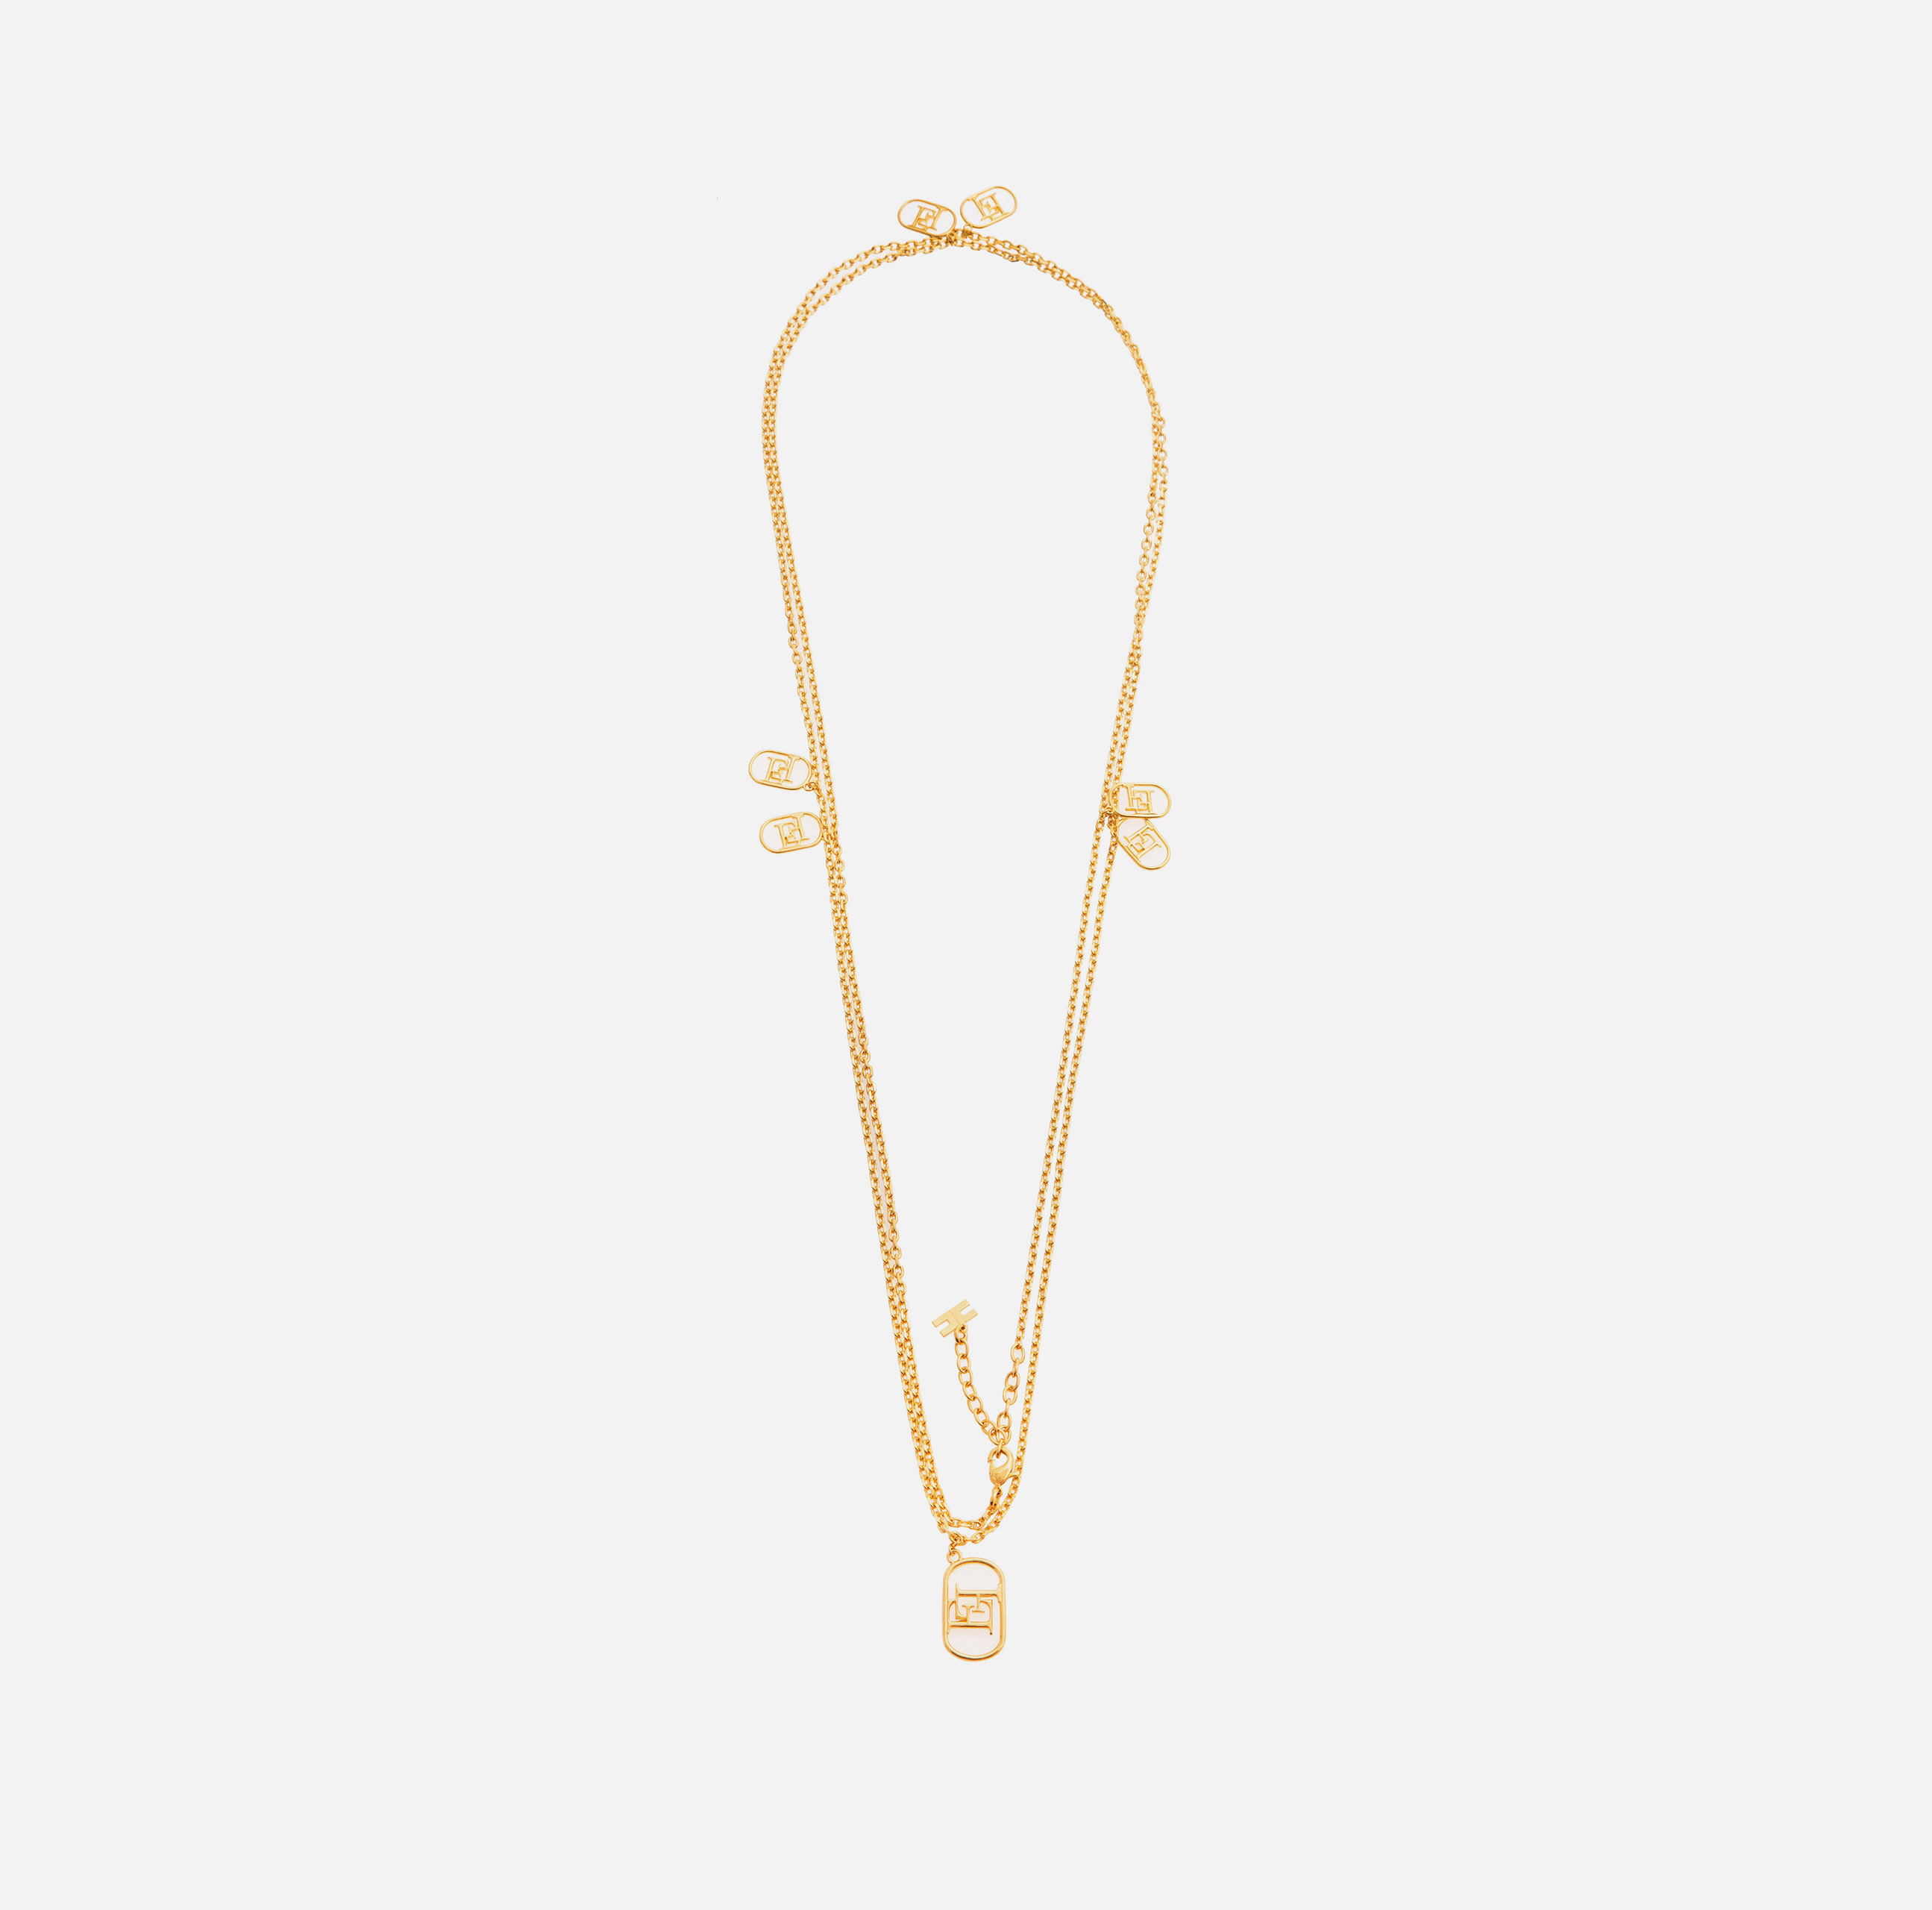 Long necklace with logo charms - ACCESSORI - Elisabetta Franchi